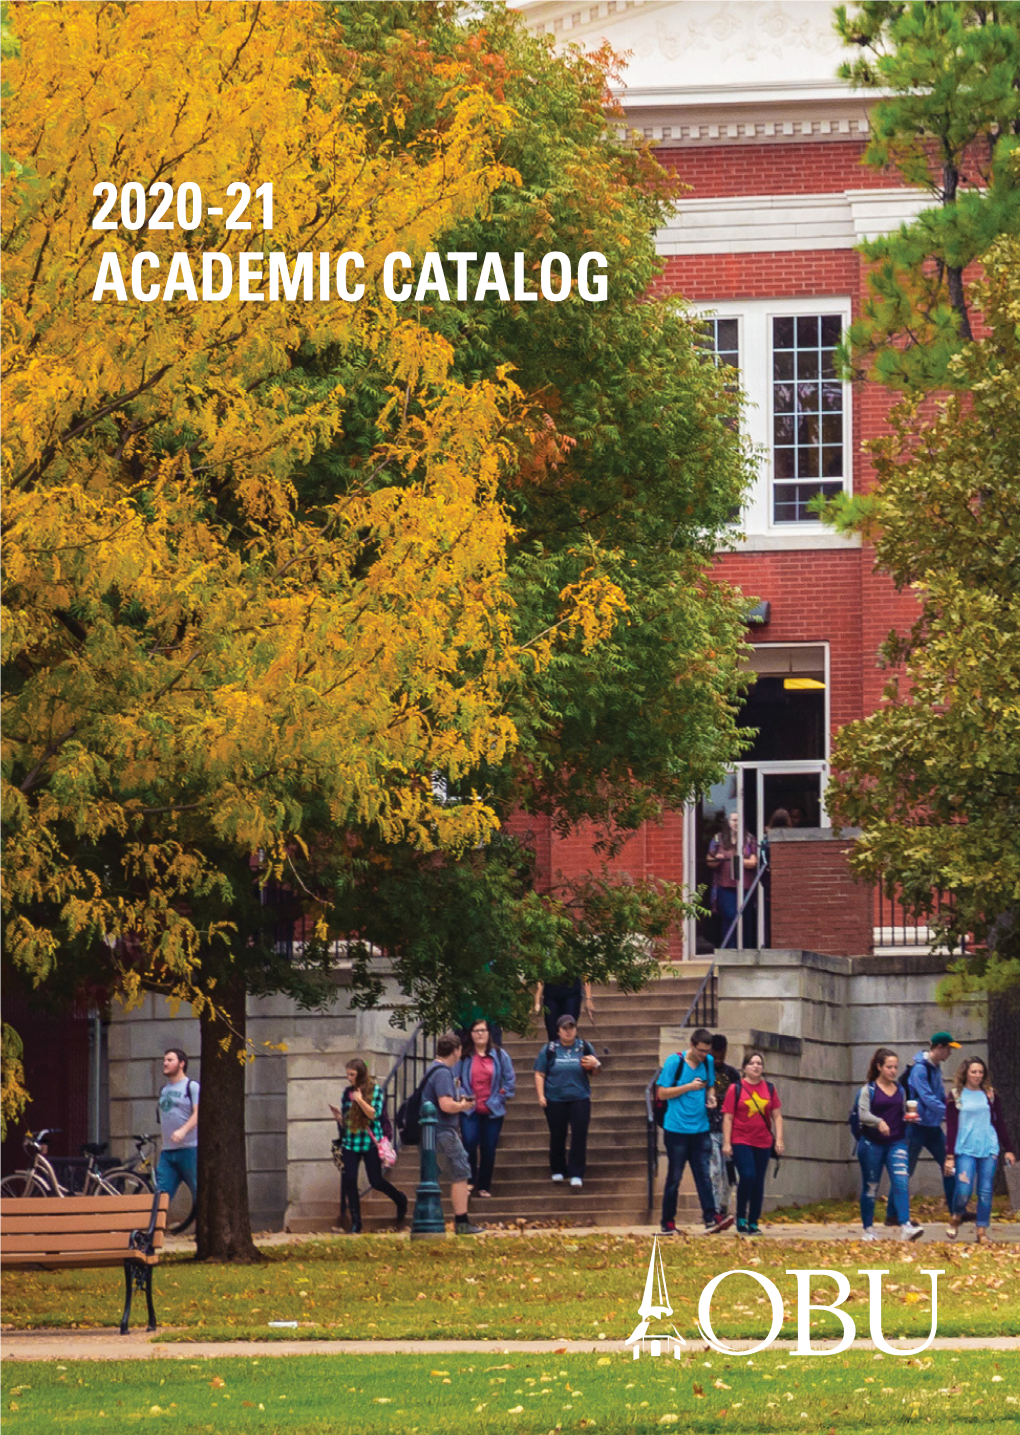 2020-21 ACADEMIC CATALOG Oklahoma Baptist University Transforms Lives by Equipping Students with a Distinctively Christian Liberal Arts Education